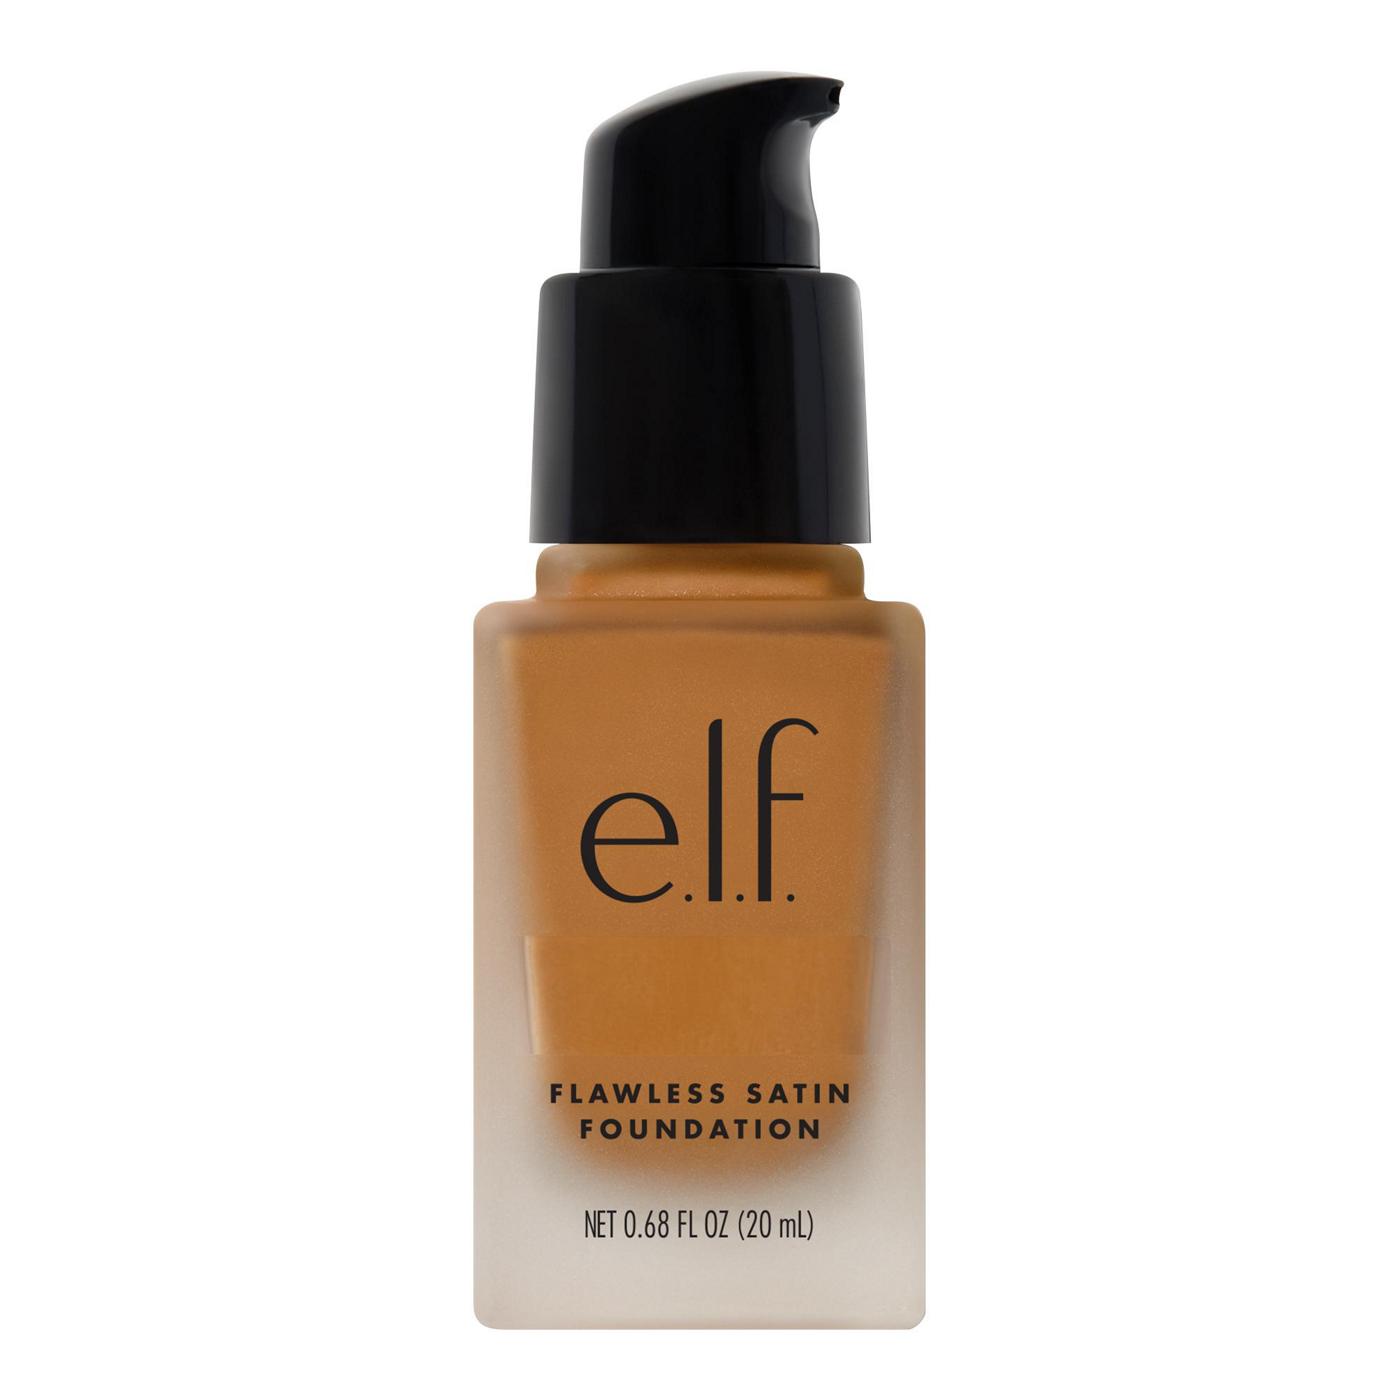 e.l.f. Flawless Satin Foundation - Latte; image 5 of 5